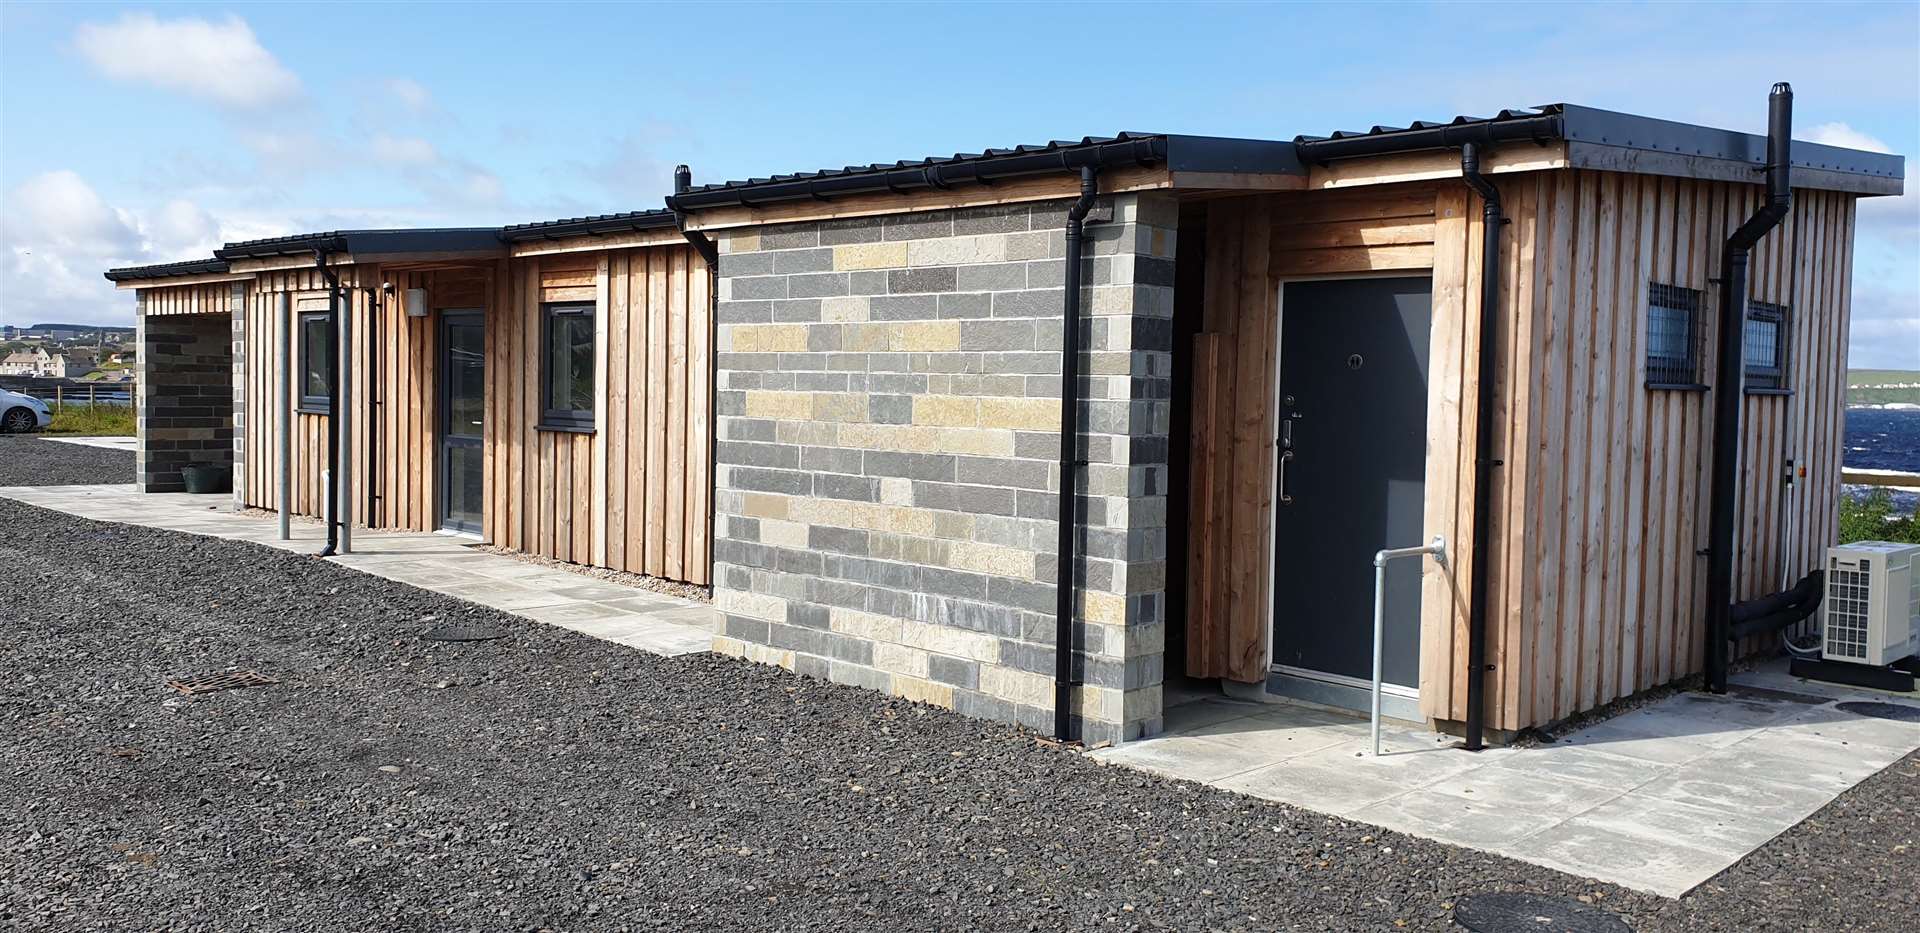 The timber-clad building has toilets, showers, a meeting room, a safety equipment store, a covered viewing area and a waste store.